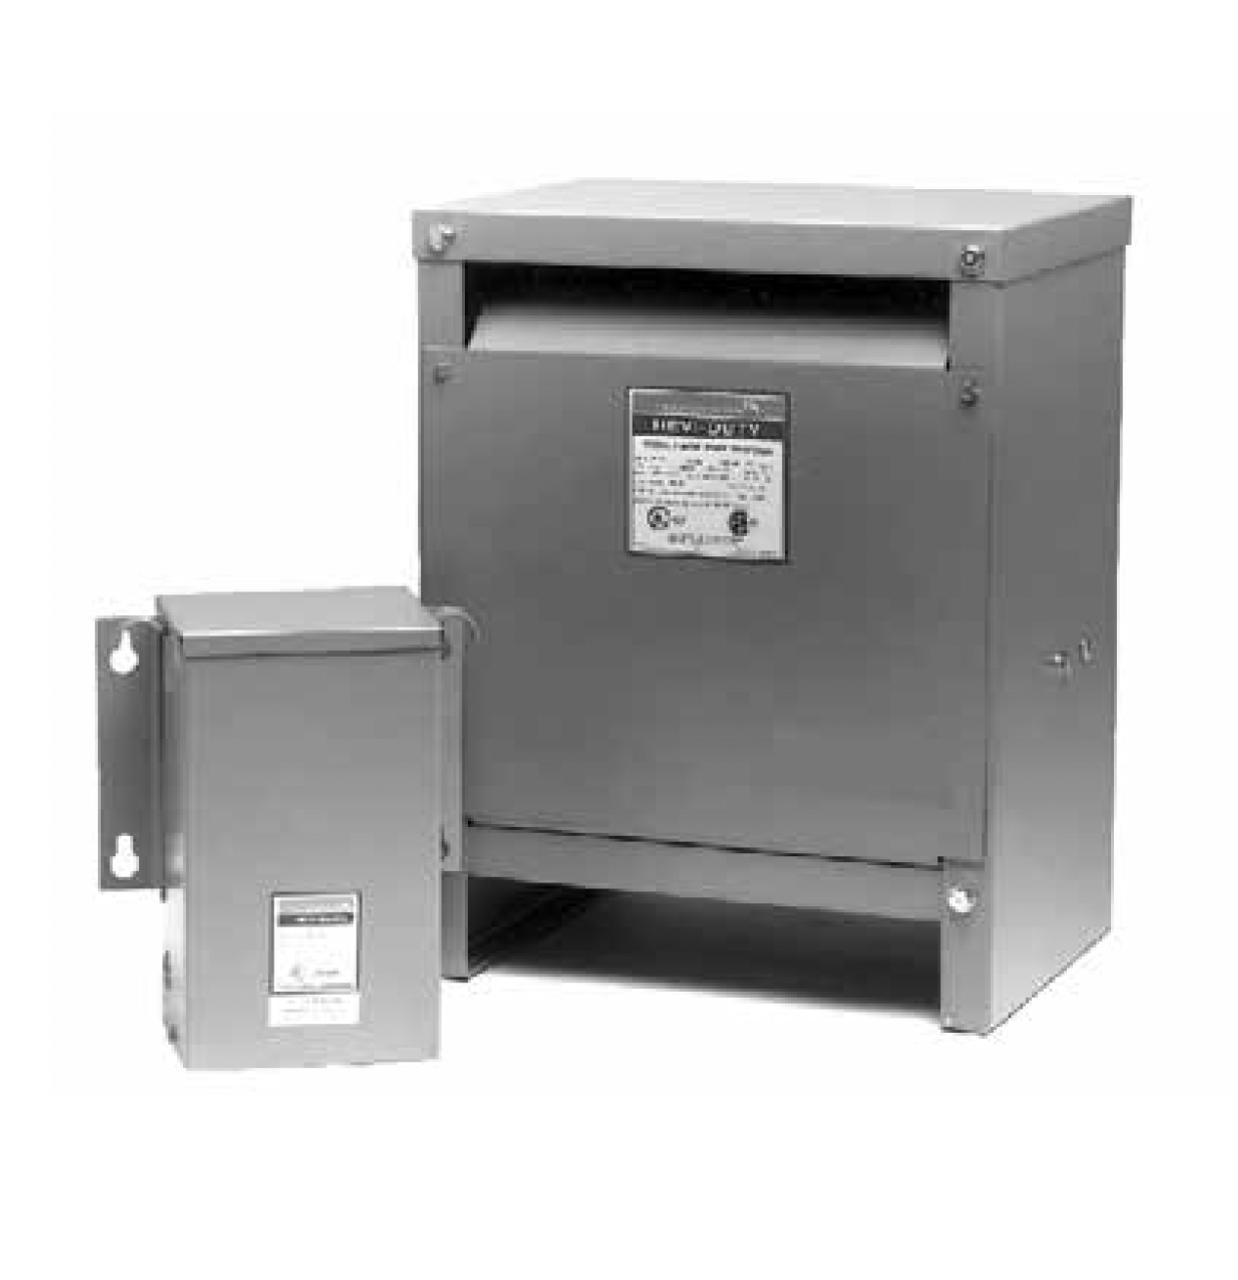 SolaHD Emerson - DT661H275S Dry-Type Distribution Transformers